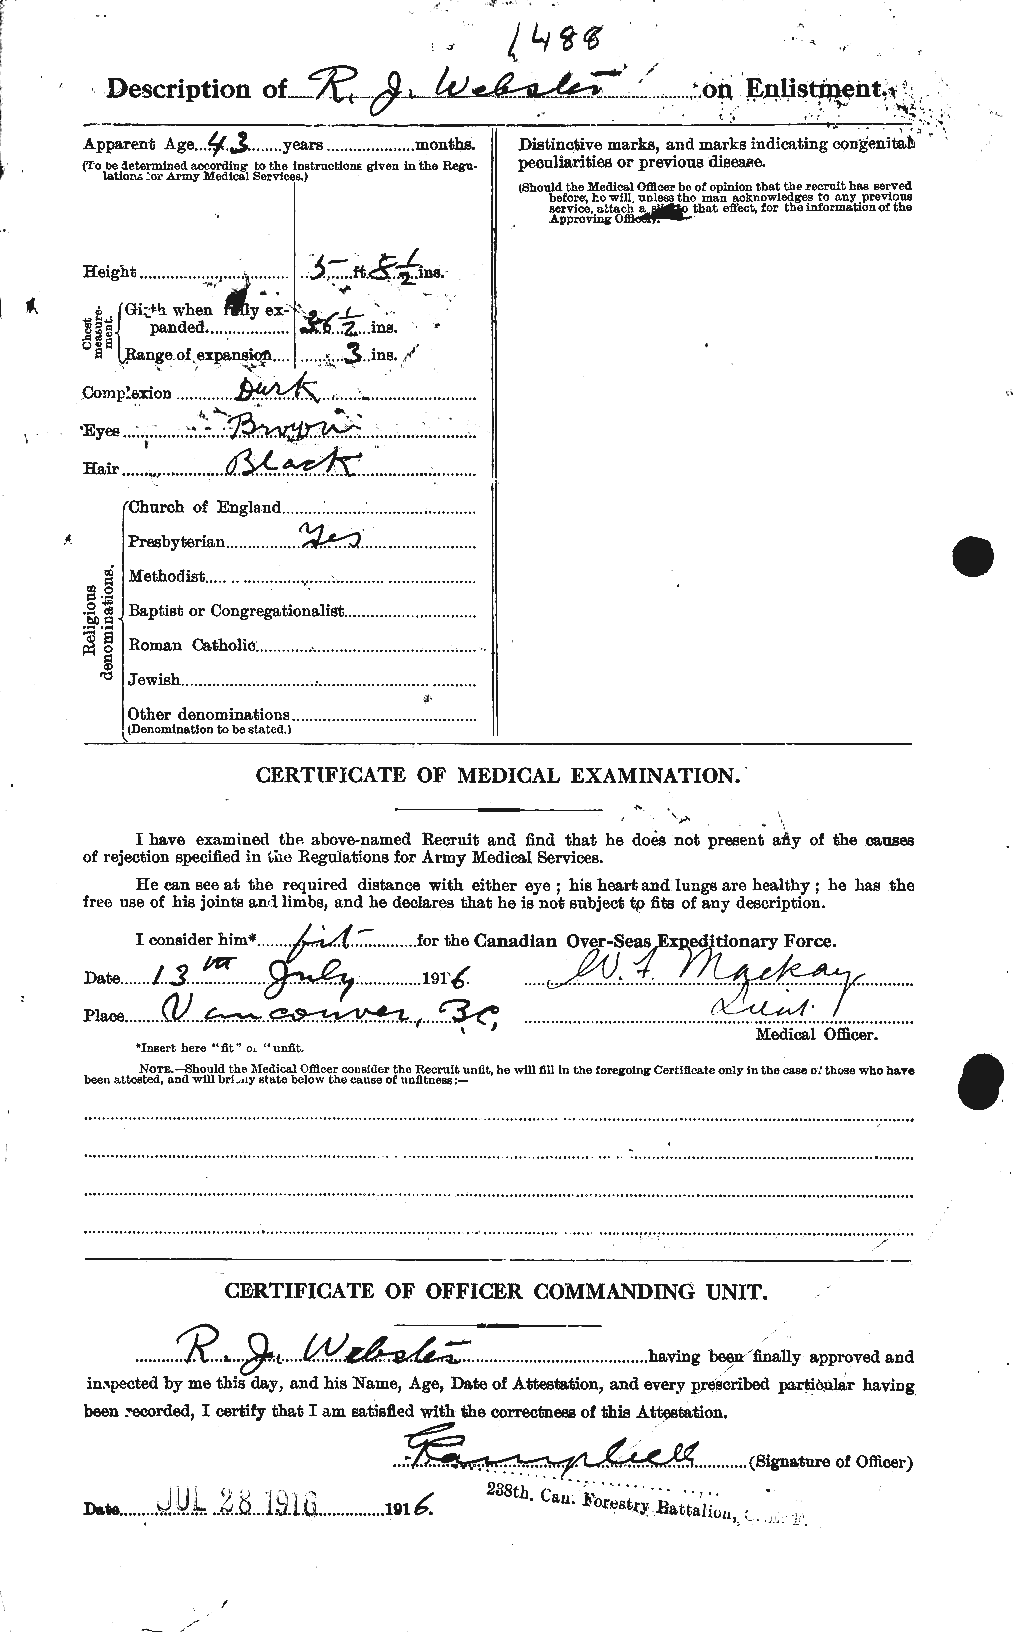 Personnel Records of the First World War - CEF 661963b